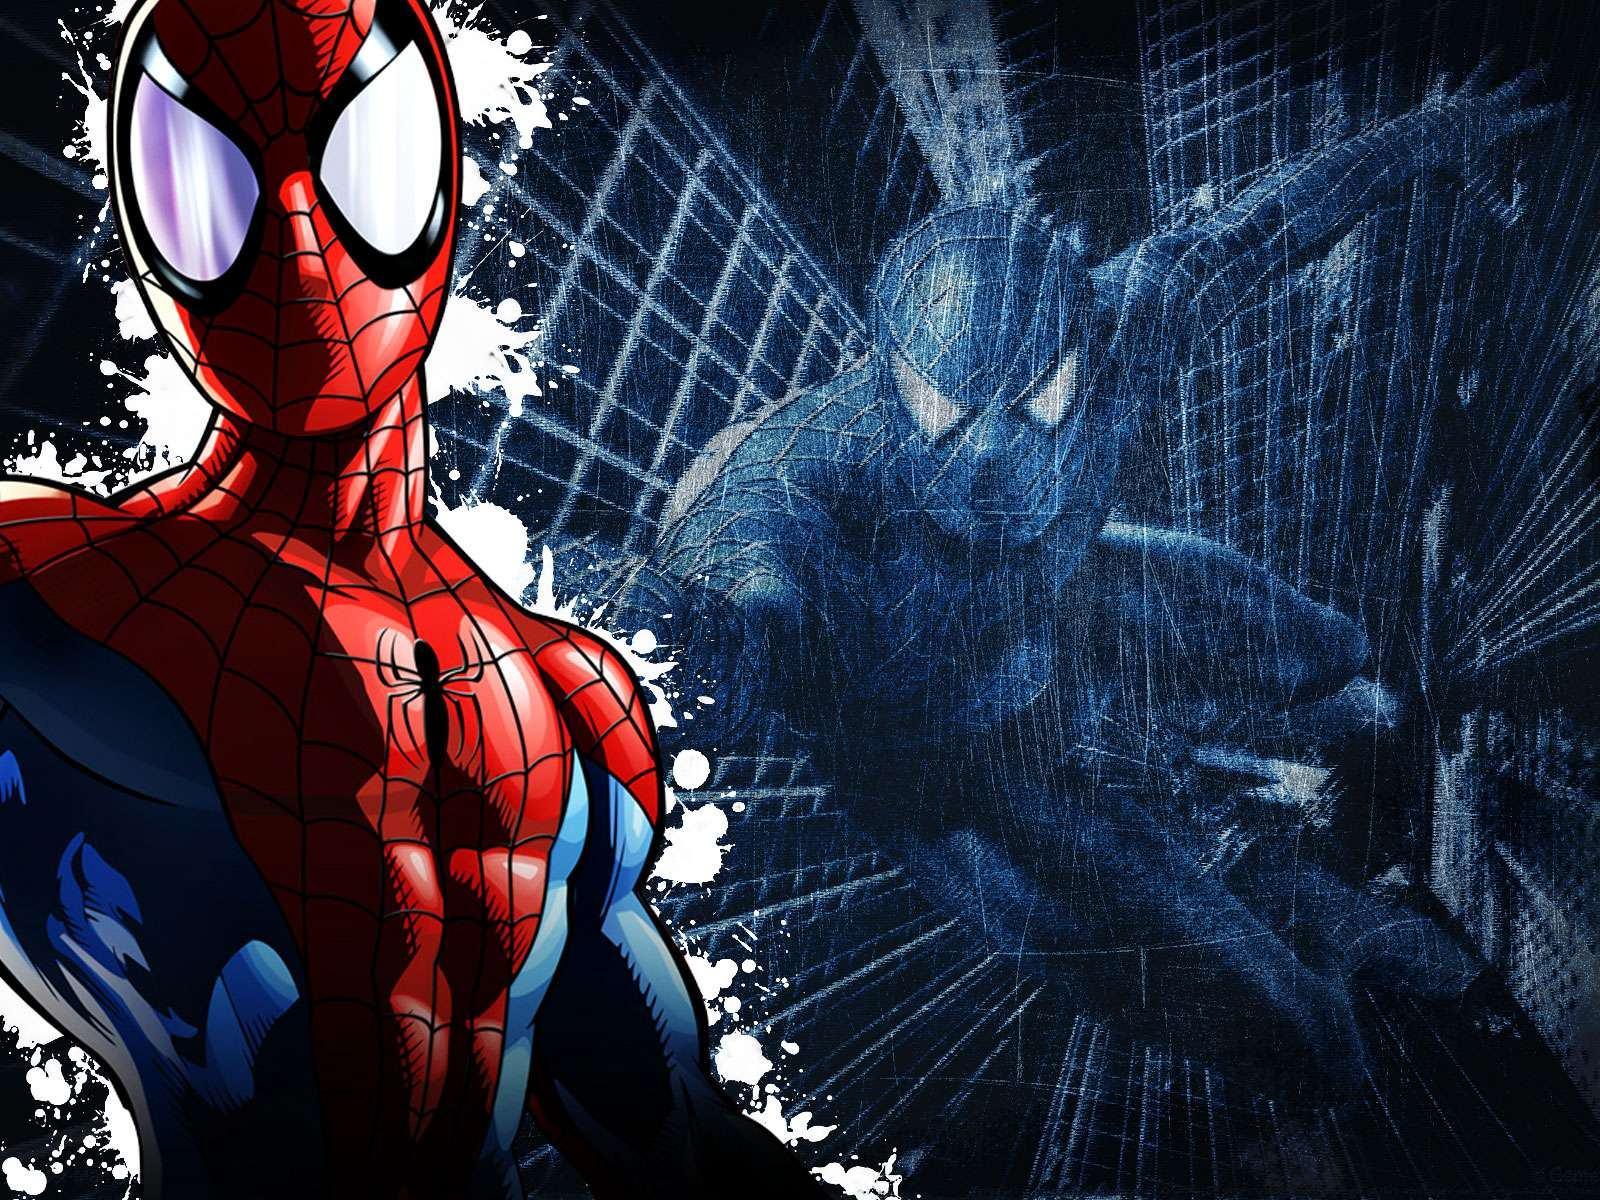 animated spiderman wallpapers animated spiderman wallpapers 020.